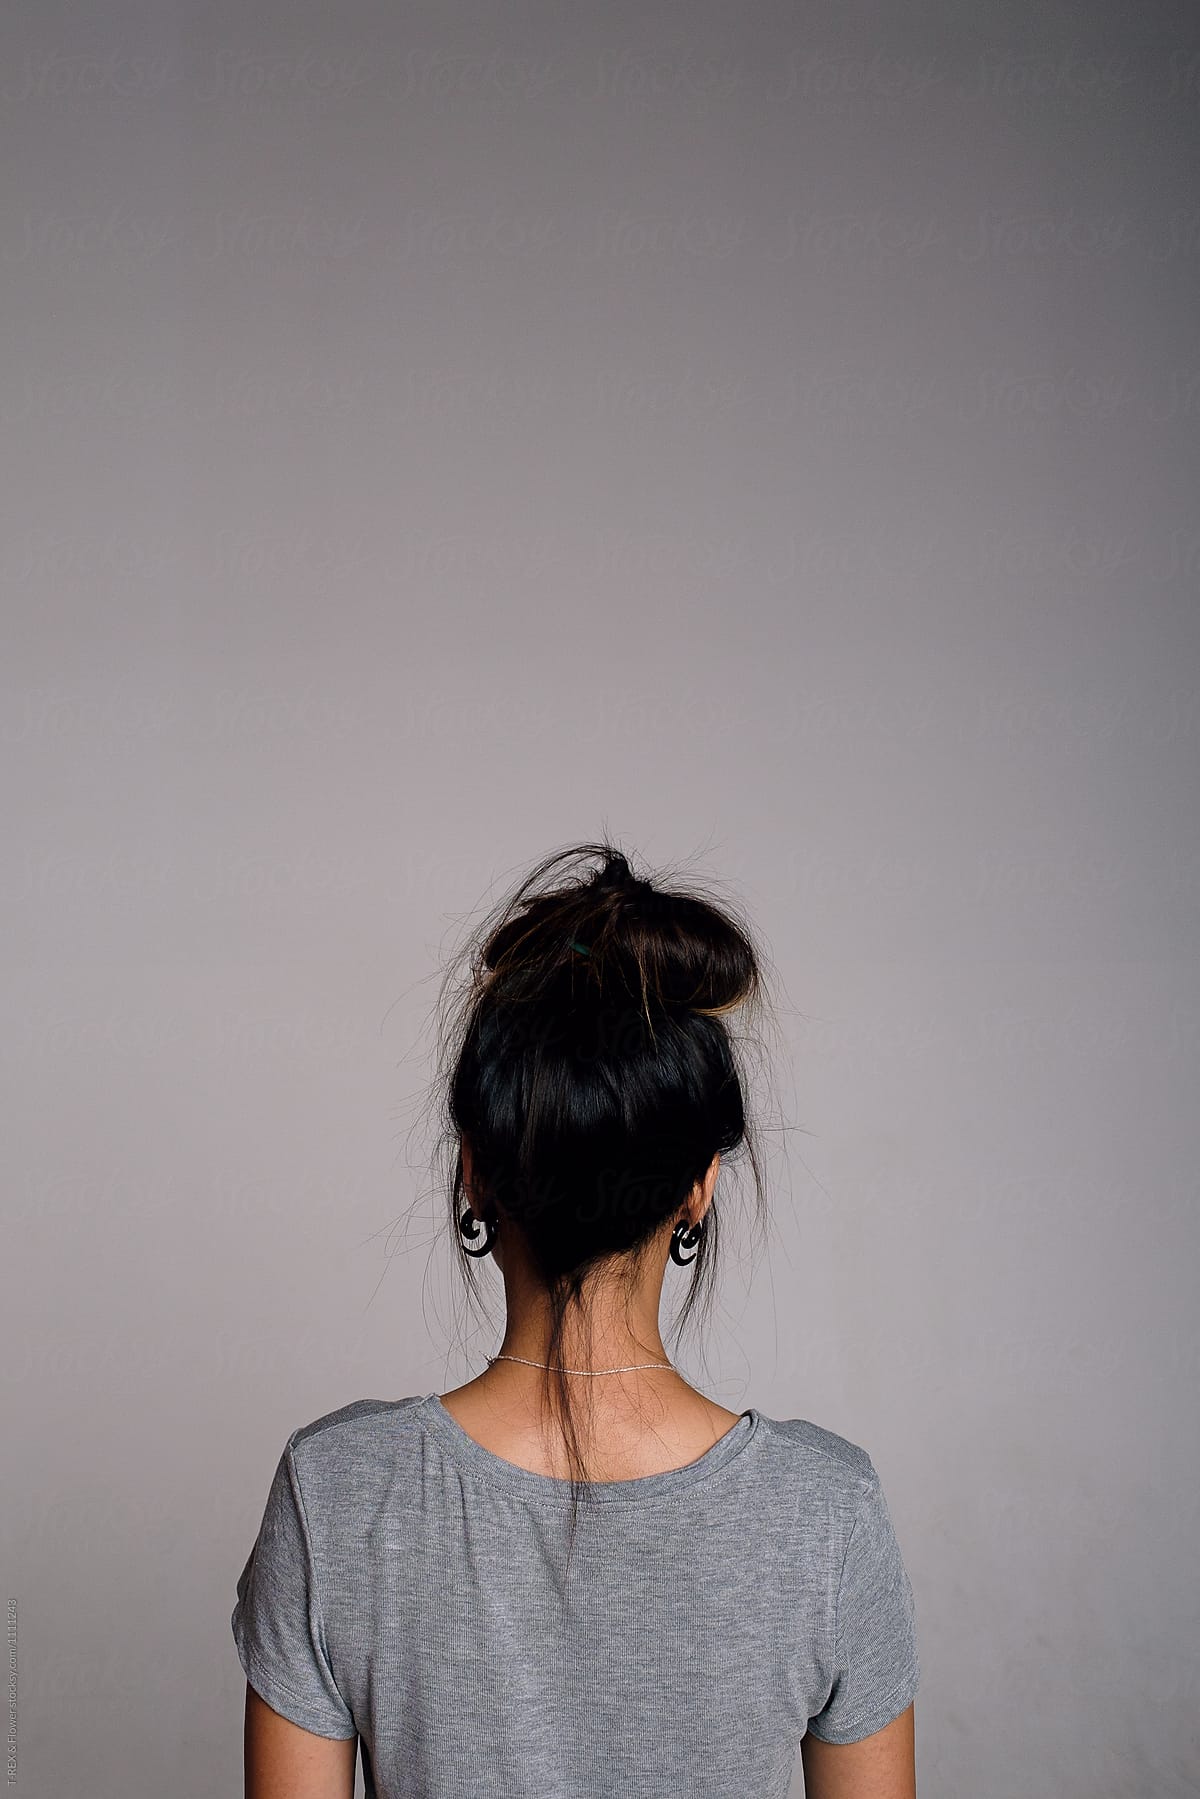 Back View Of Brunette Girl With Hairstyle Against Of Grey Background By Danil Nevsky